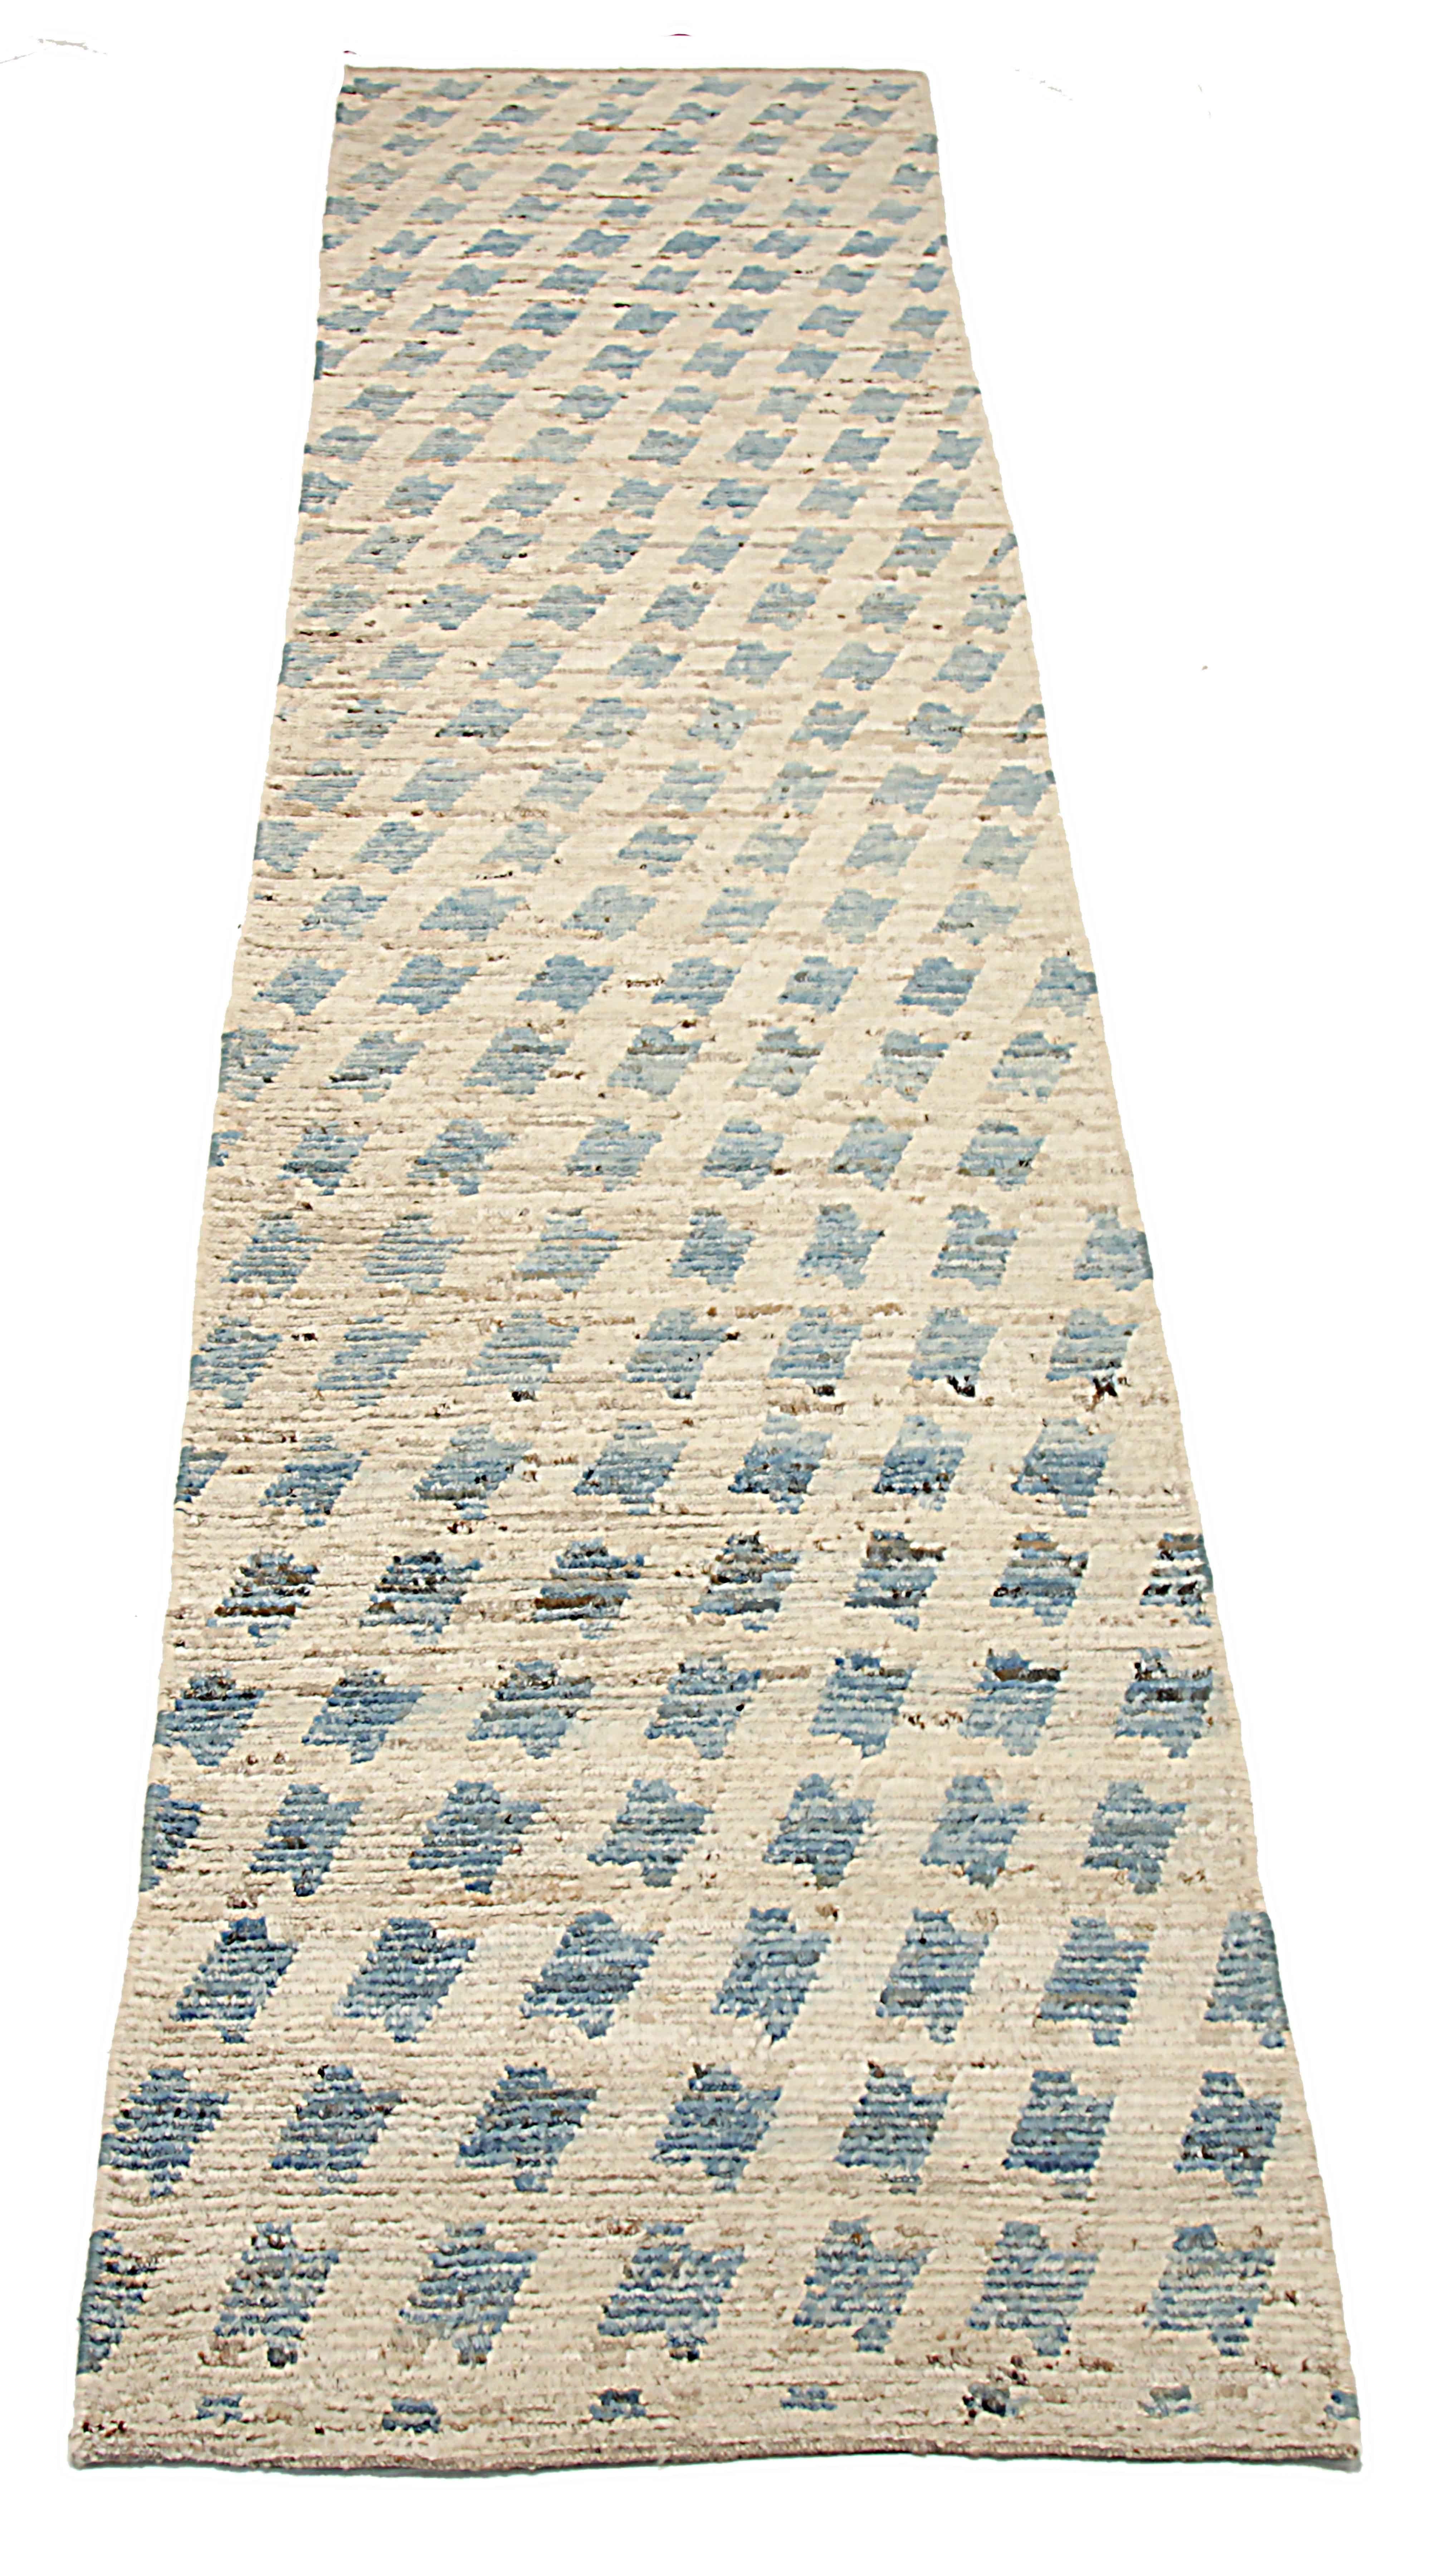 New Afghan runner rug handwoven from the finest sheep’s wool. It’s colored with all-natural vegetable dyes that are safe for humans and pets. It’s a traditional Moroccan design handwoven by expert artisans. It’s a lovely runner rug that can be